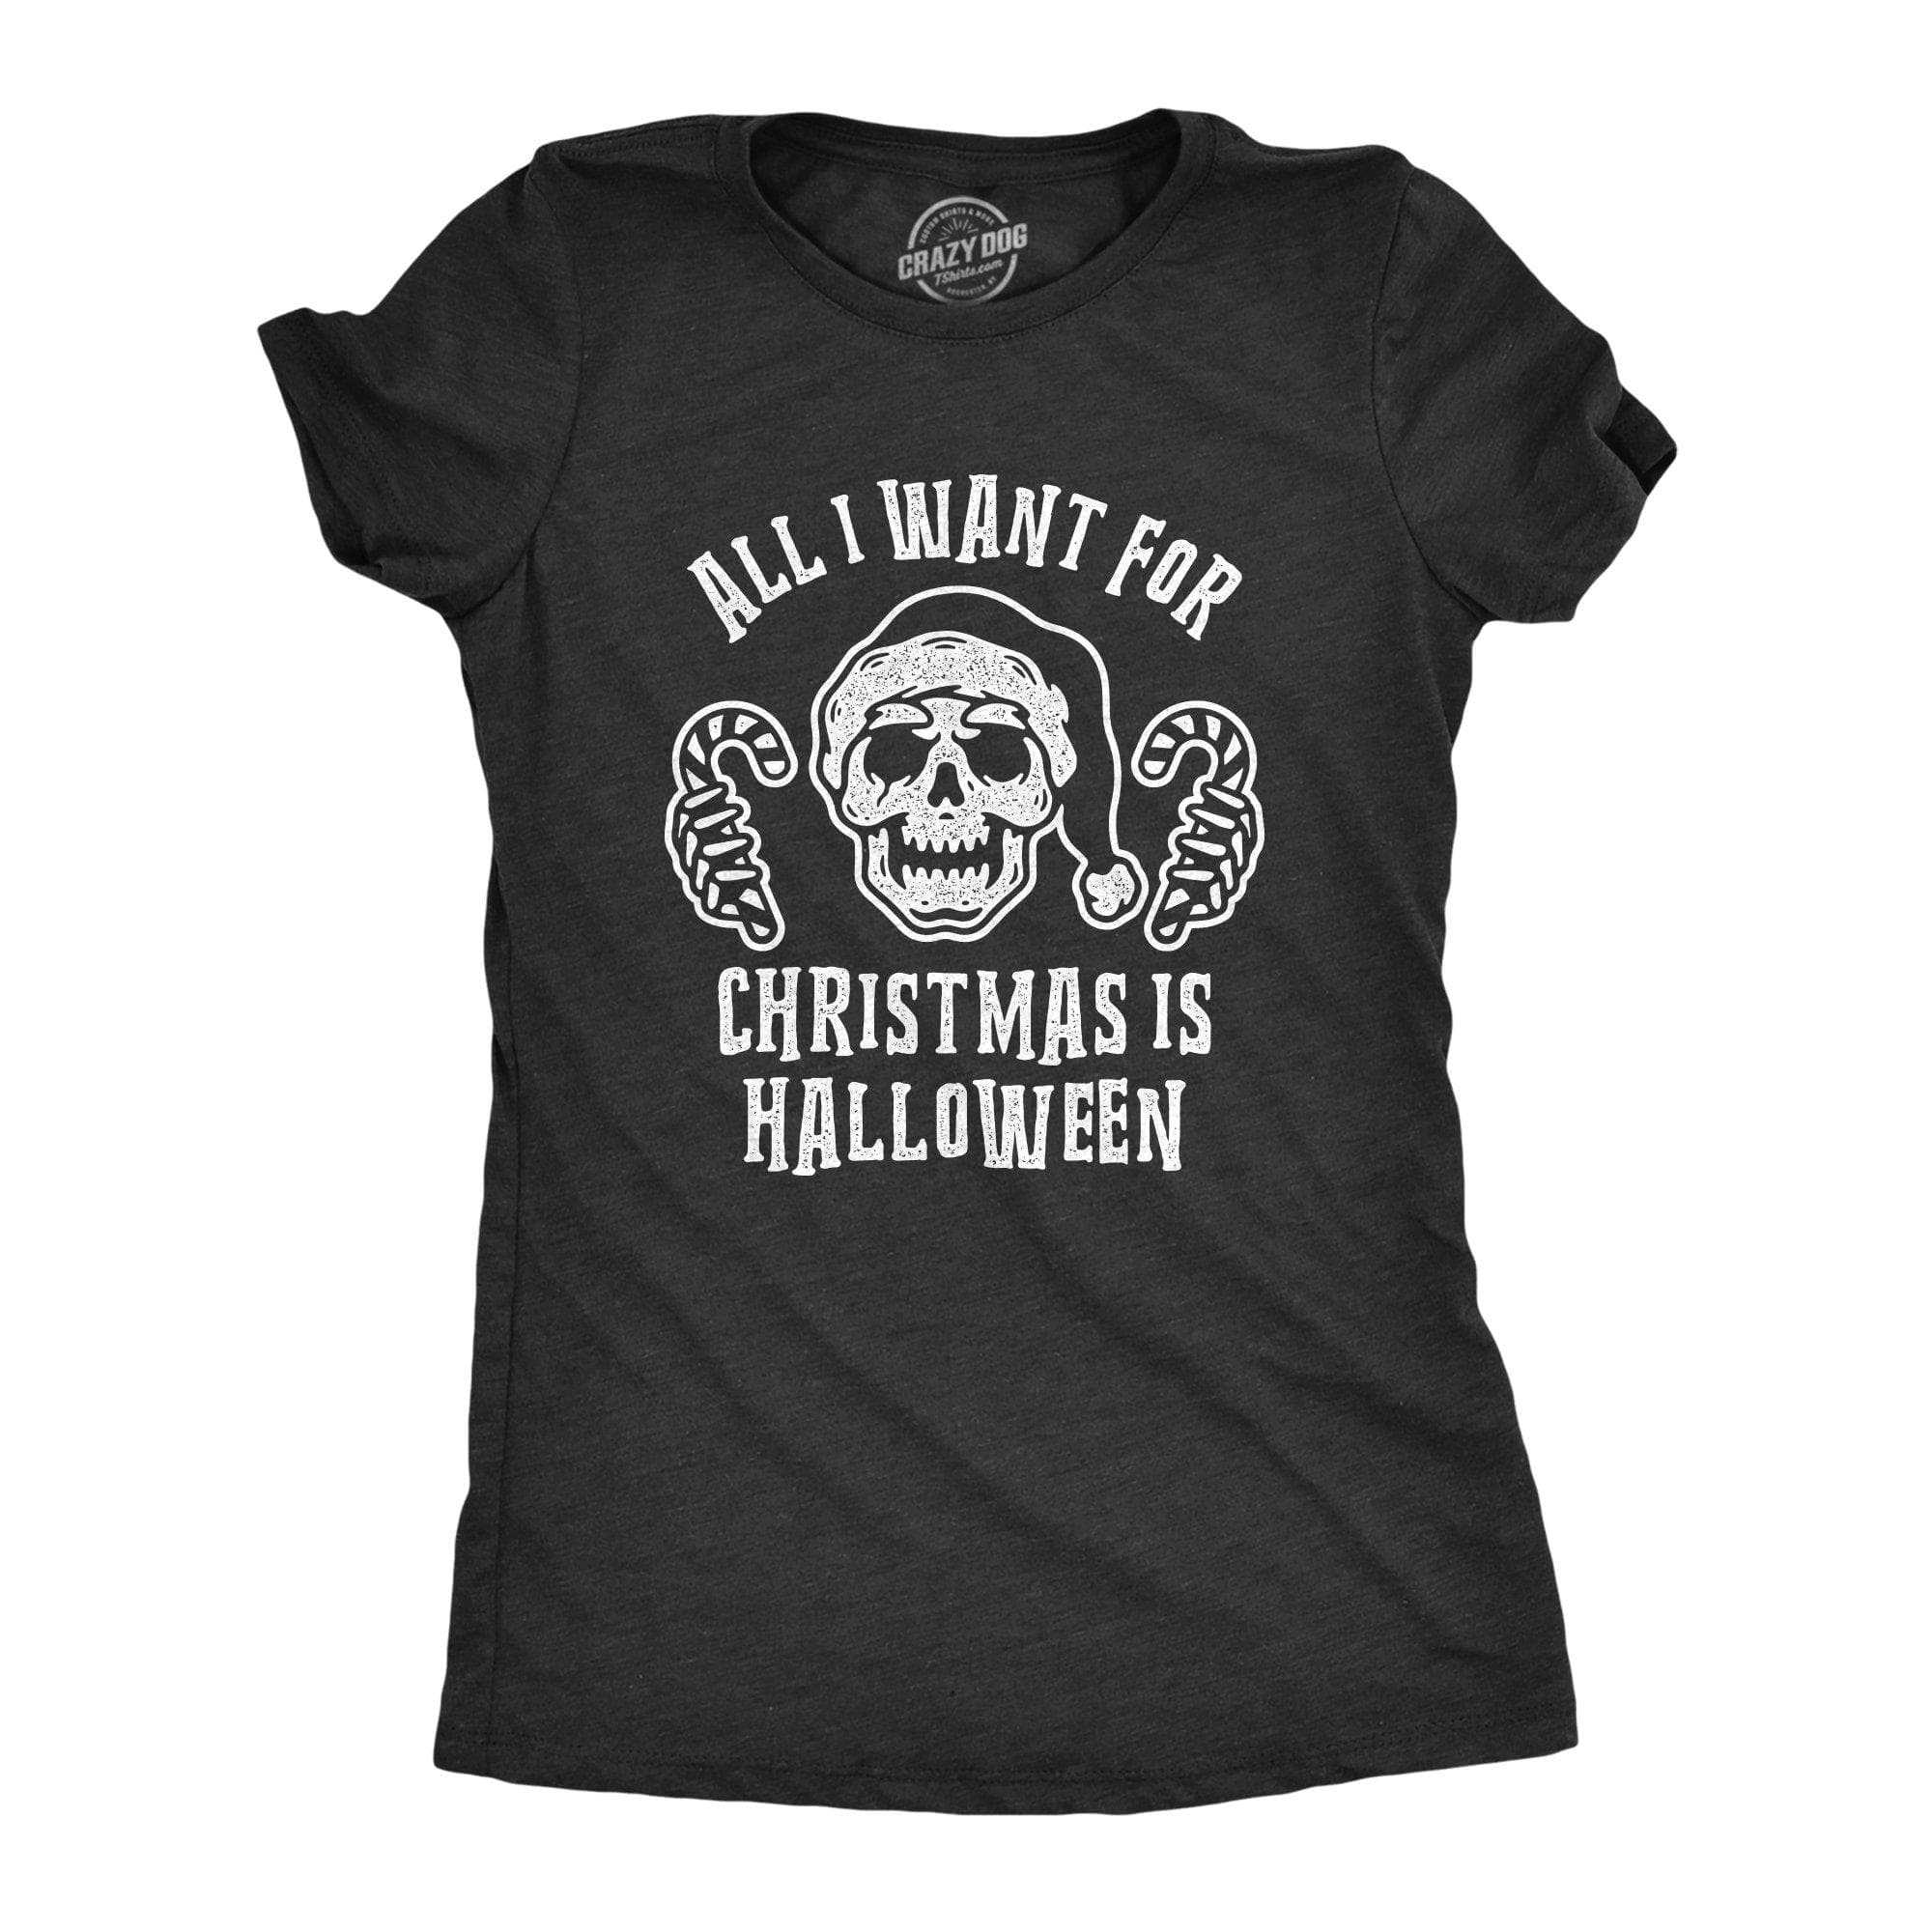 All I Want For Christmas Is Halloween Women's Tshirt - Crazy Dog T-Shirts